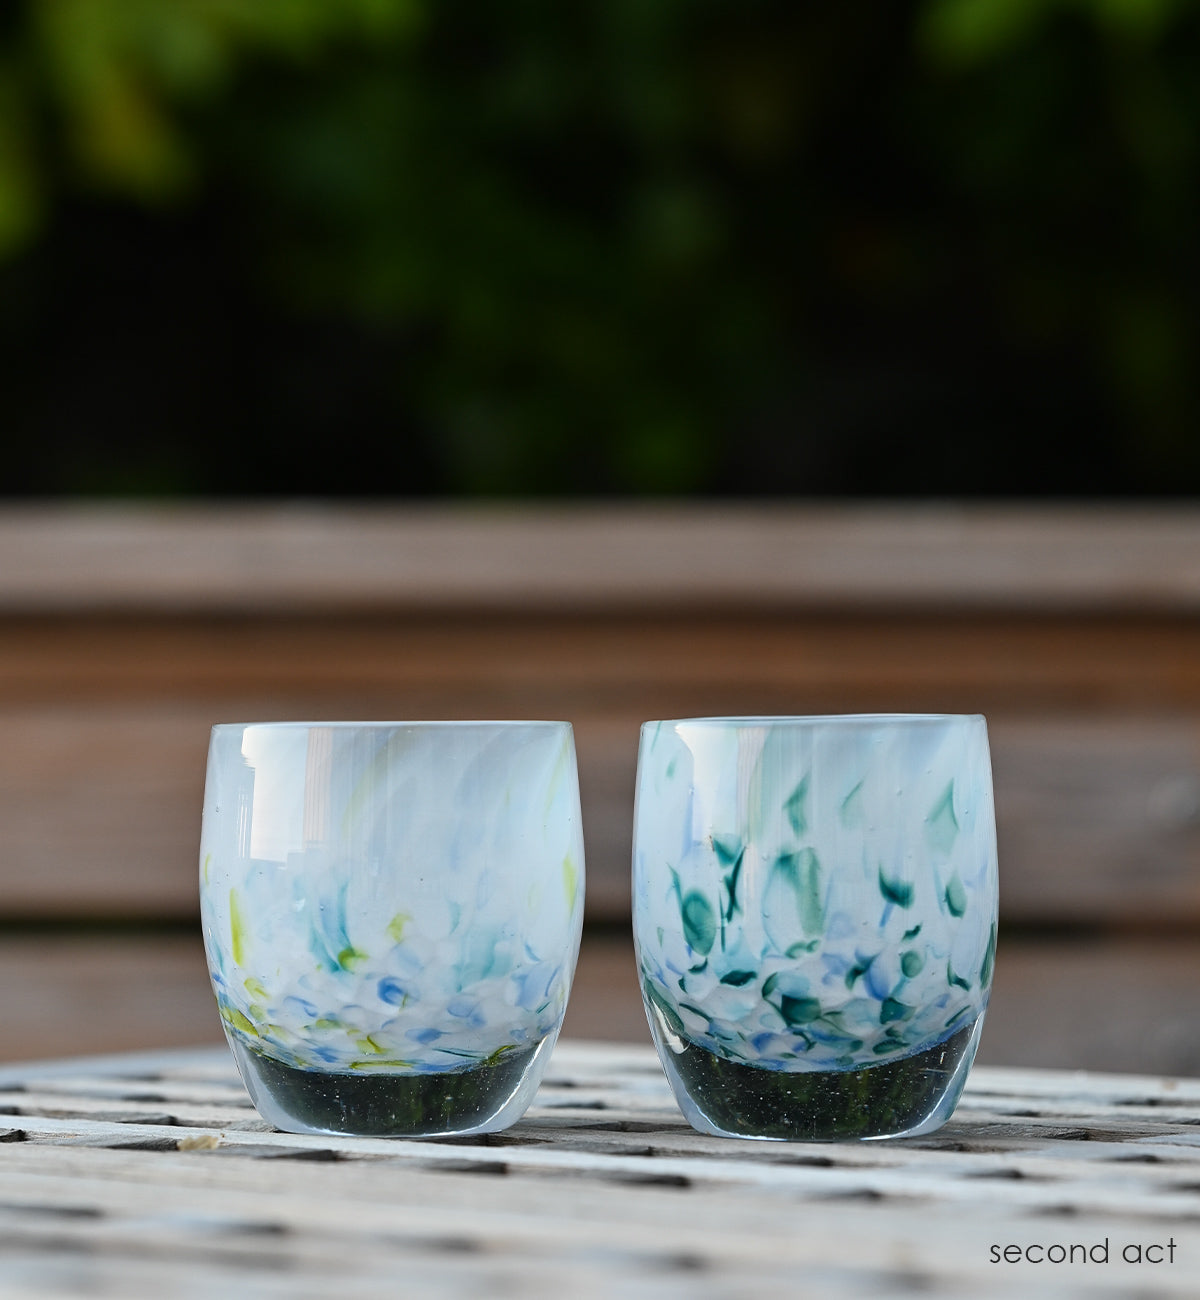 second act hand-blown glass votive candle holder made from recycled glass from 43 colors.